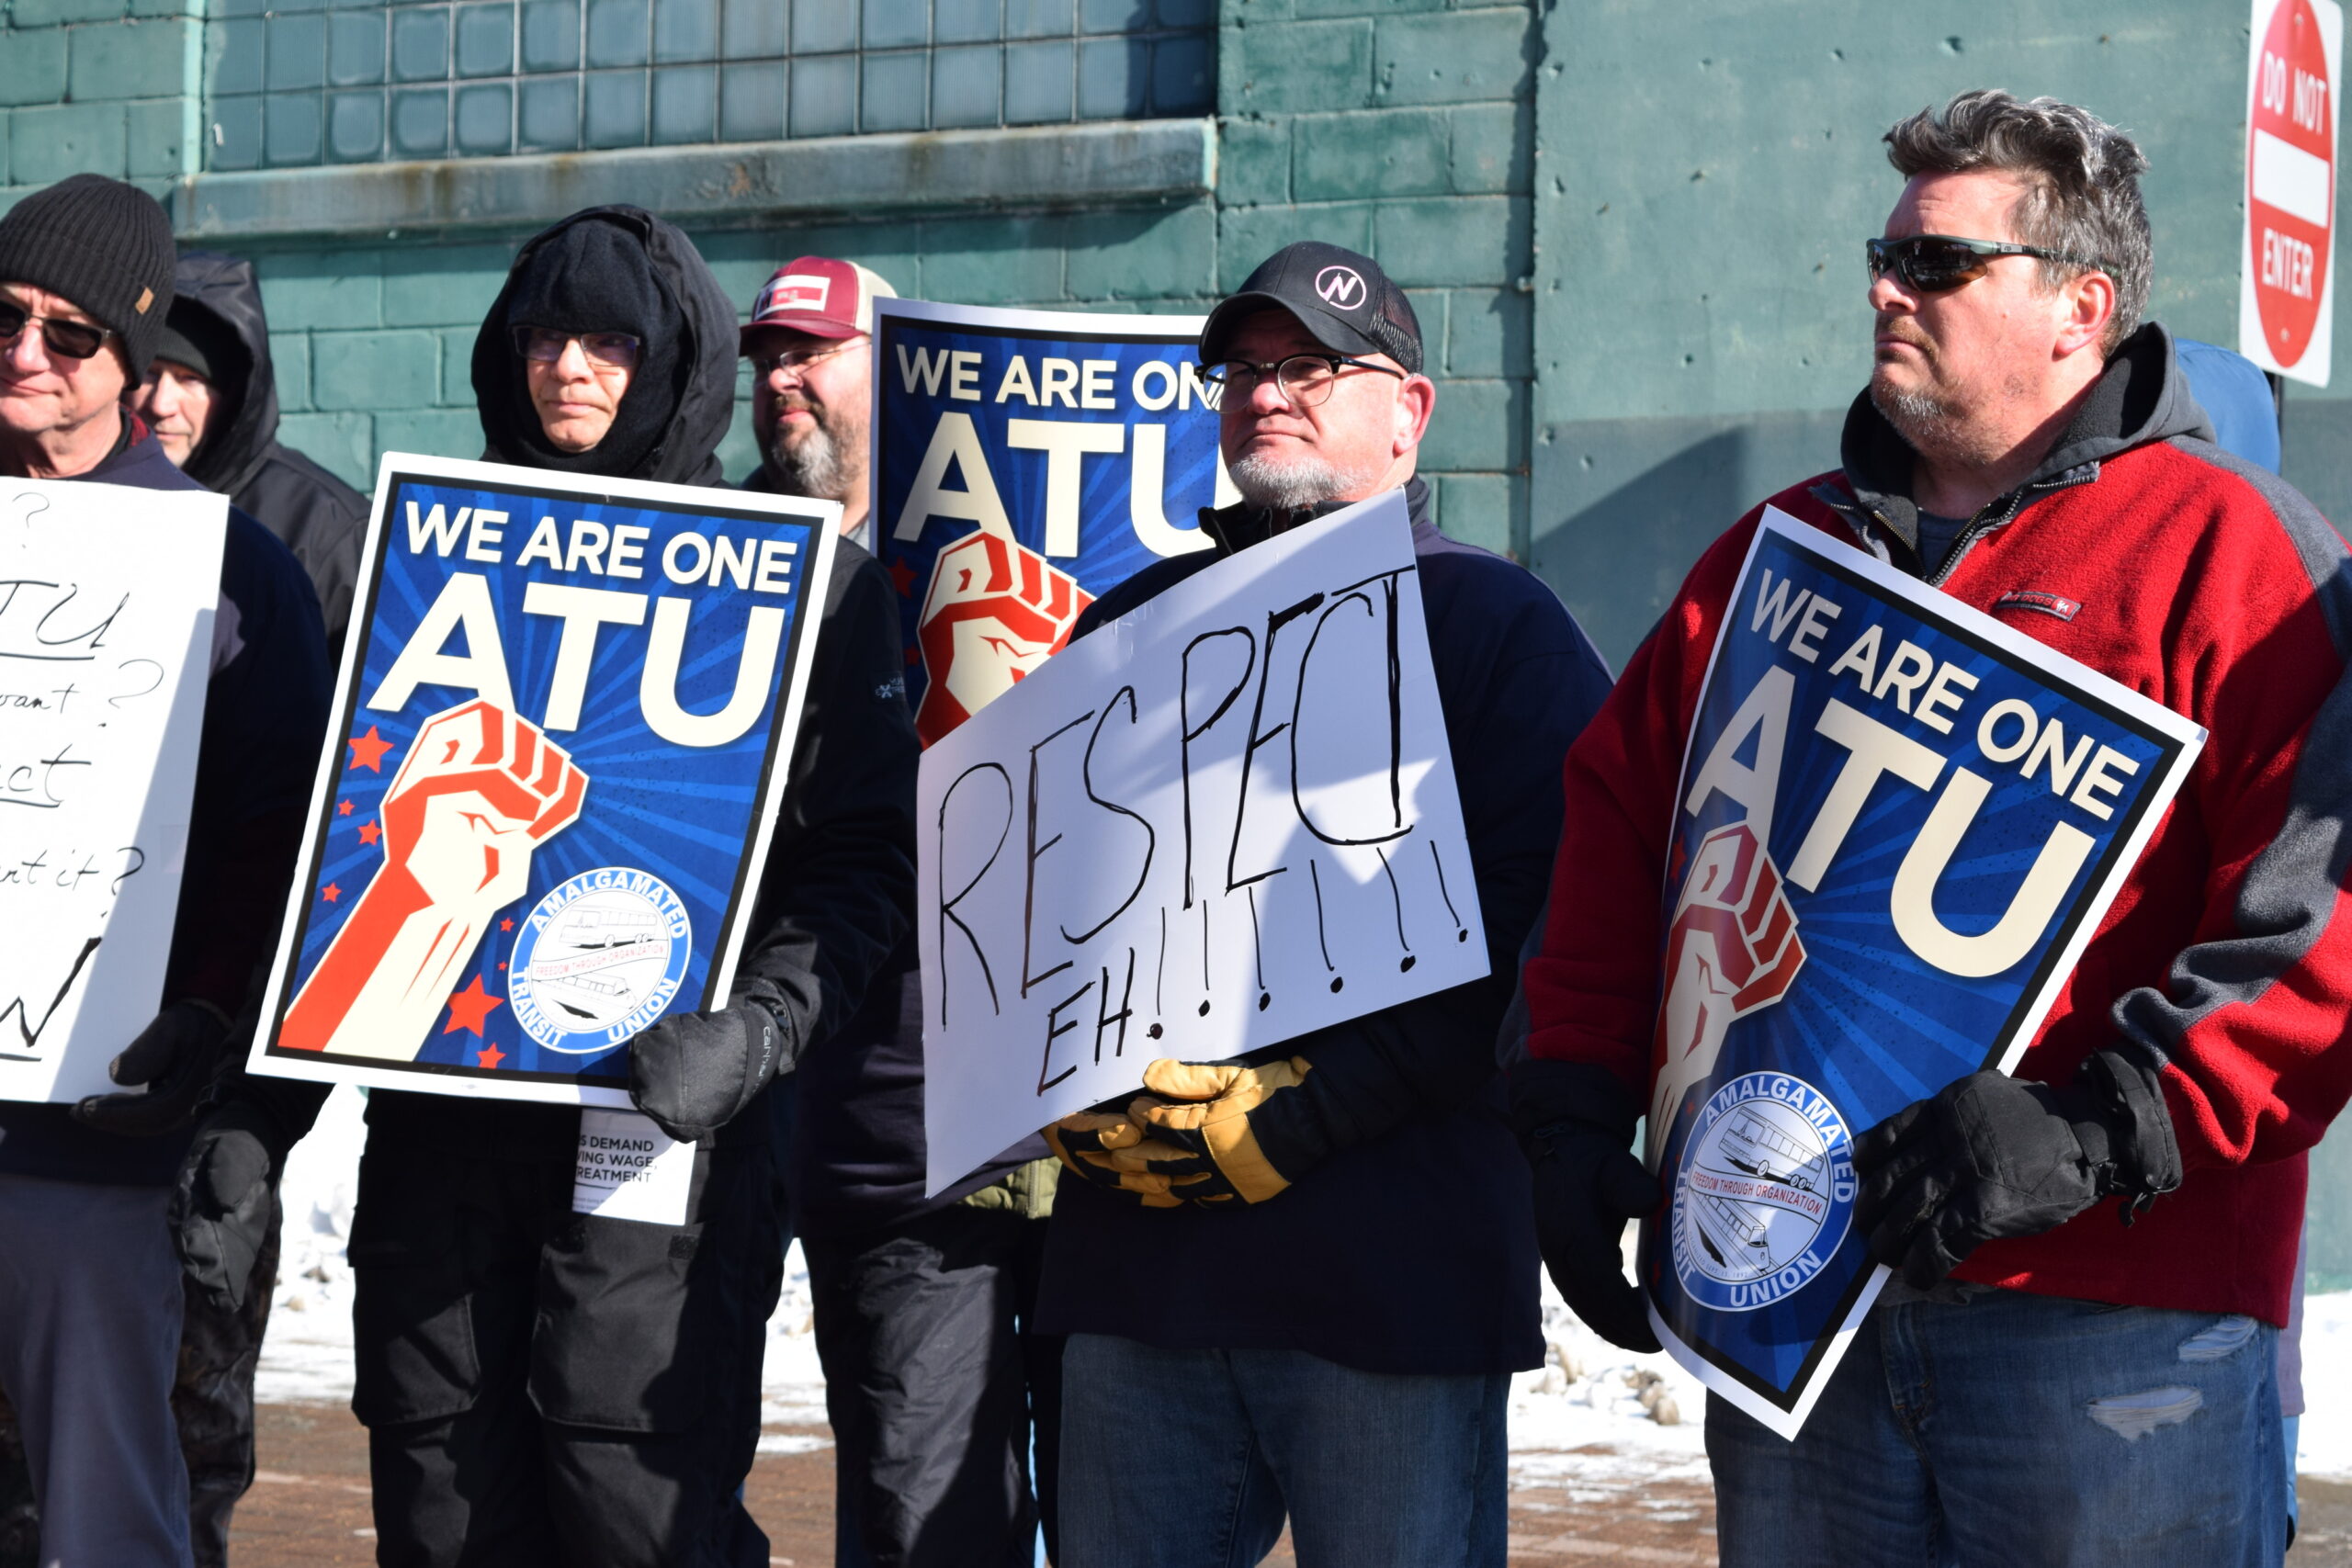 La Crosse bus drivers hold protest signs outside downtown station